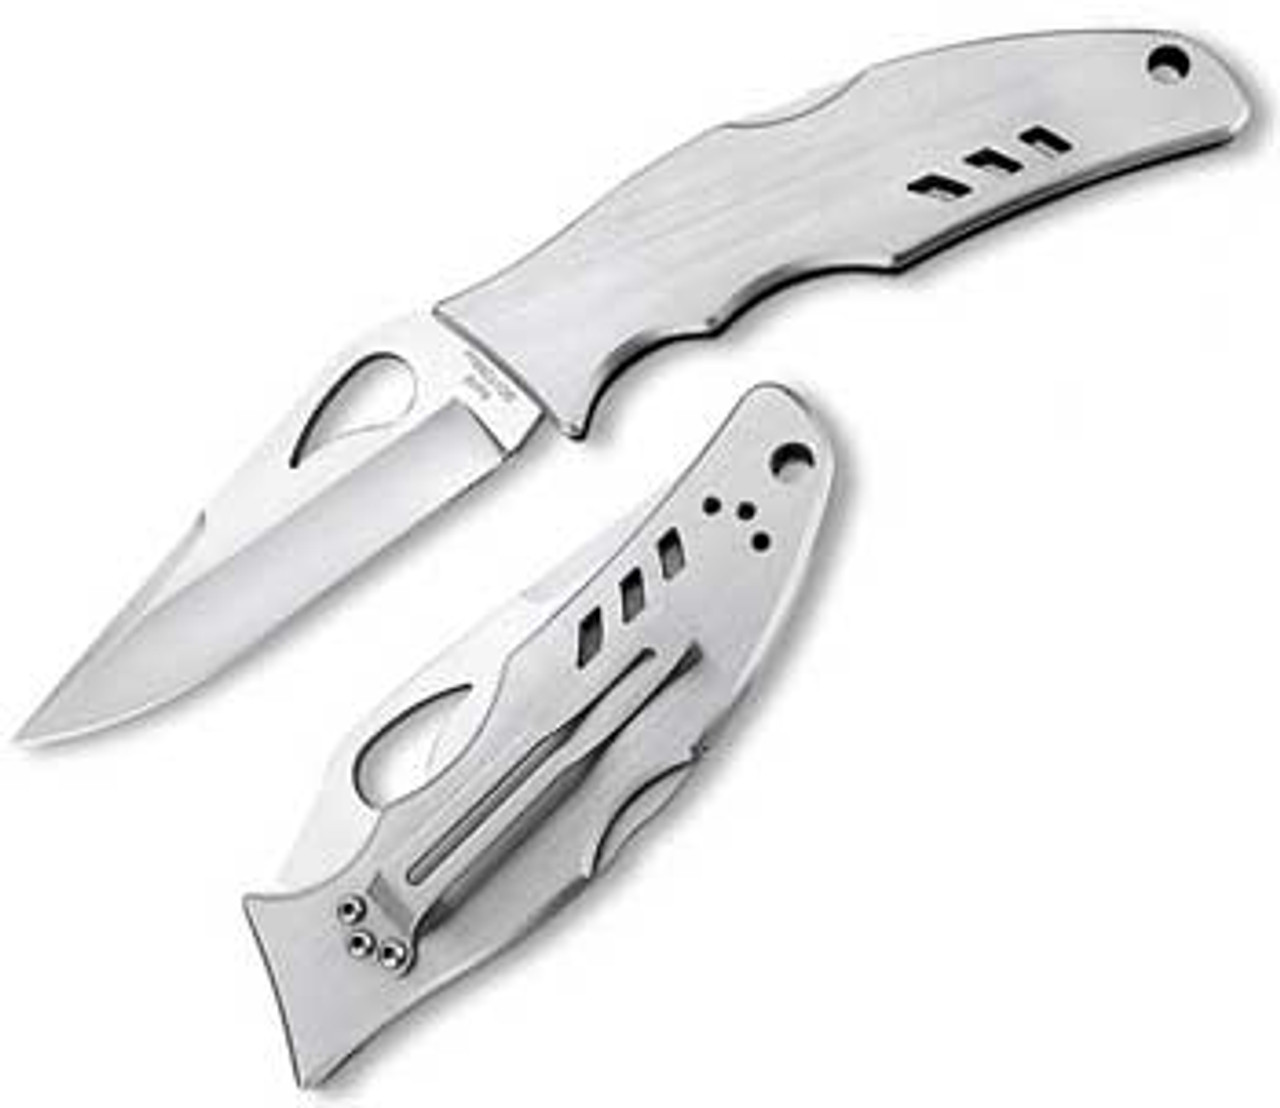 Byrd Flight (BY05P) 3.33" 8Cr13MoV Satin Clip Point PLain Blade, Brushed Stainless Steel Handle